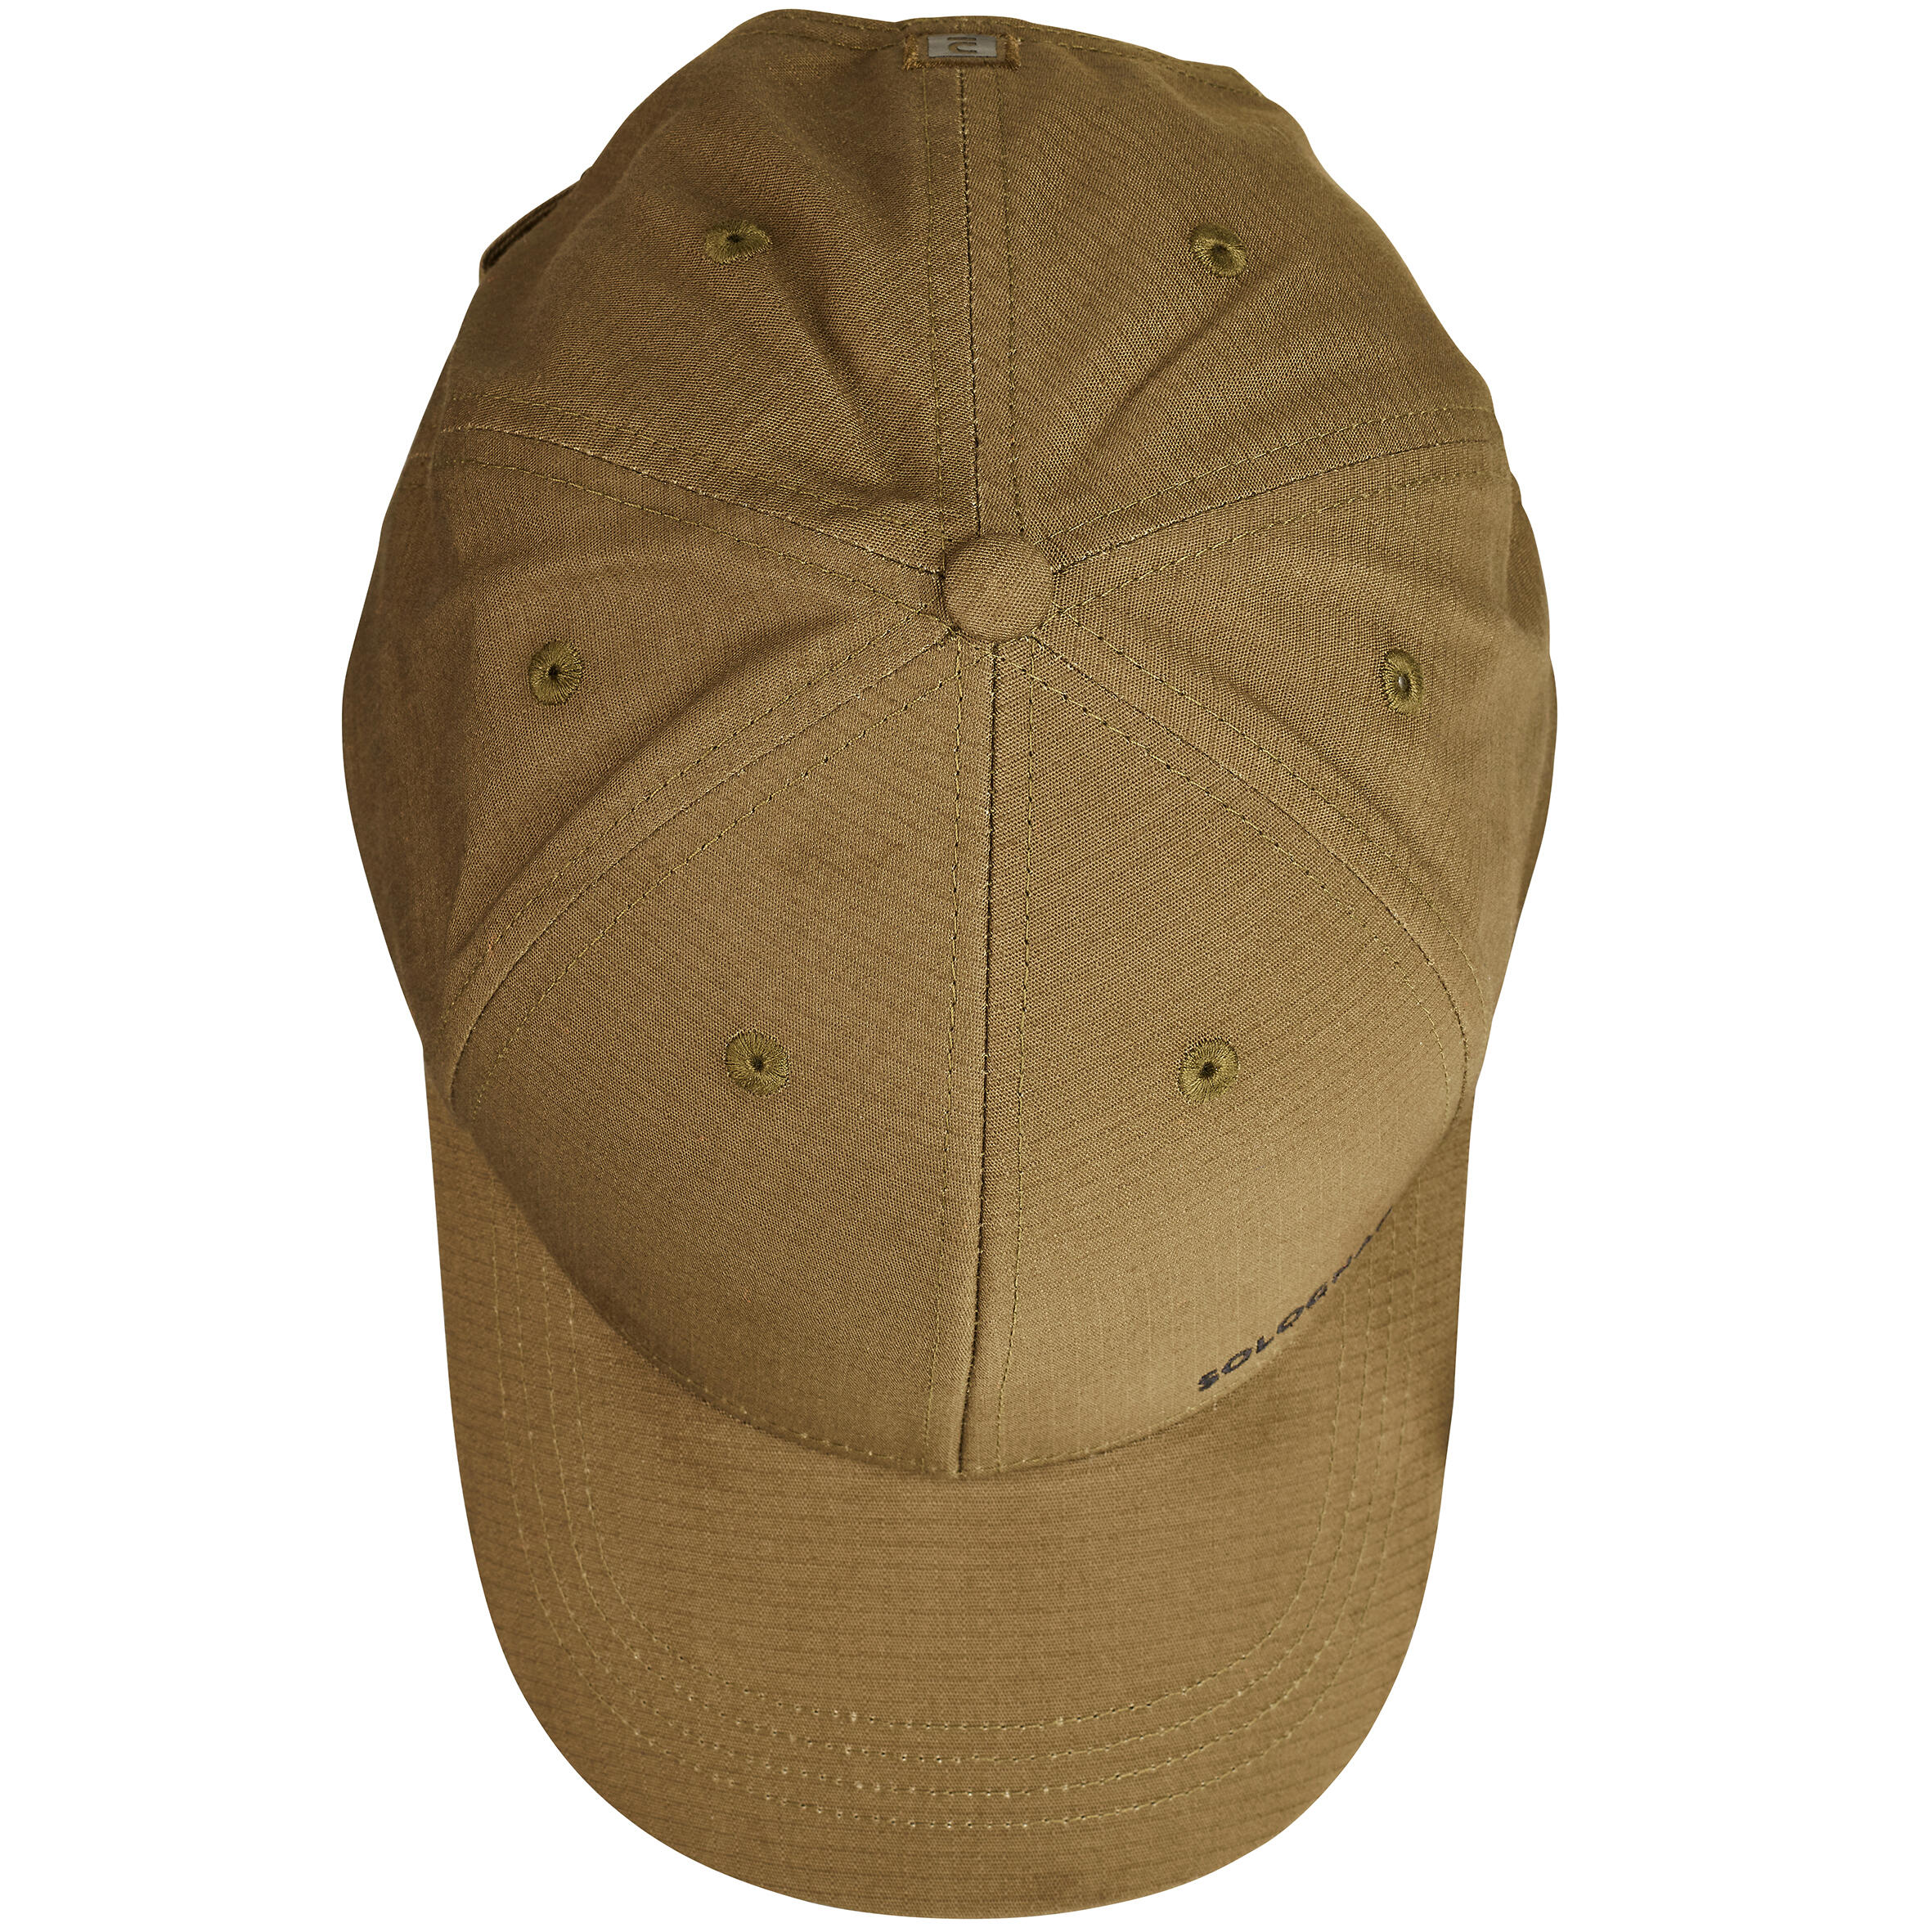 Durable Country Sport Cap 500 - Olive Green 8/10